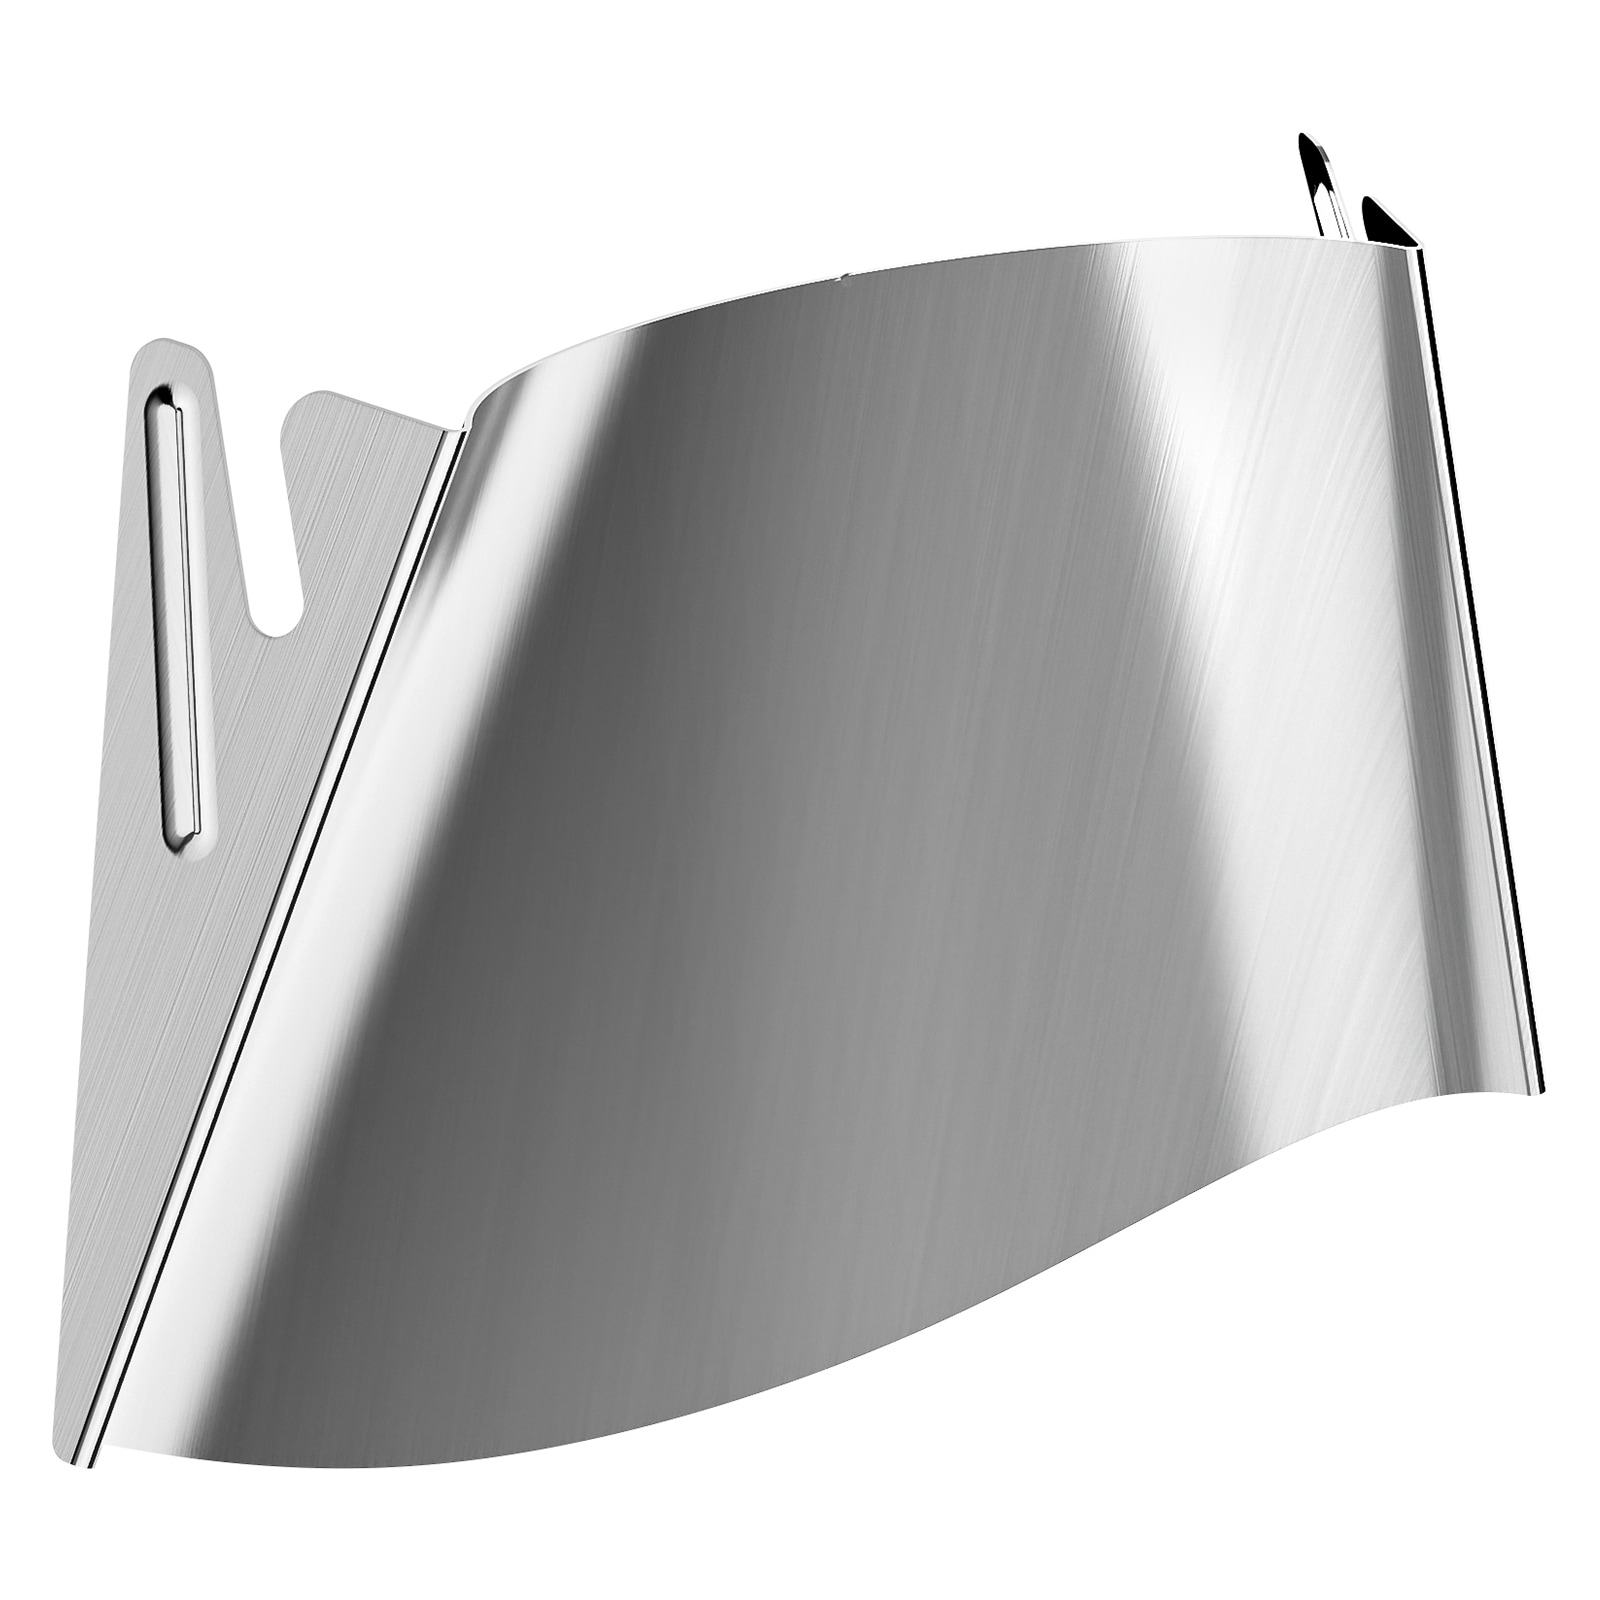 Stainless Steel Pouring Chute Attachment for KitchenAid Stand